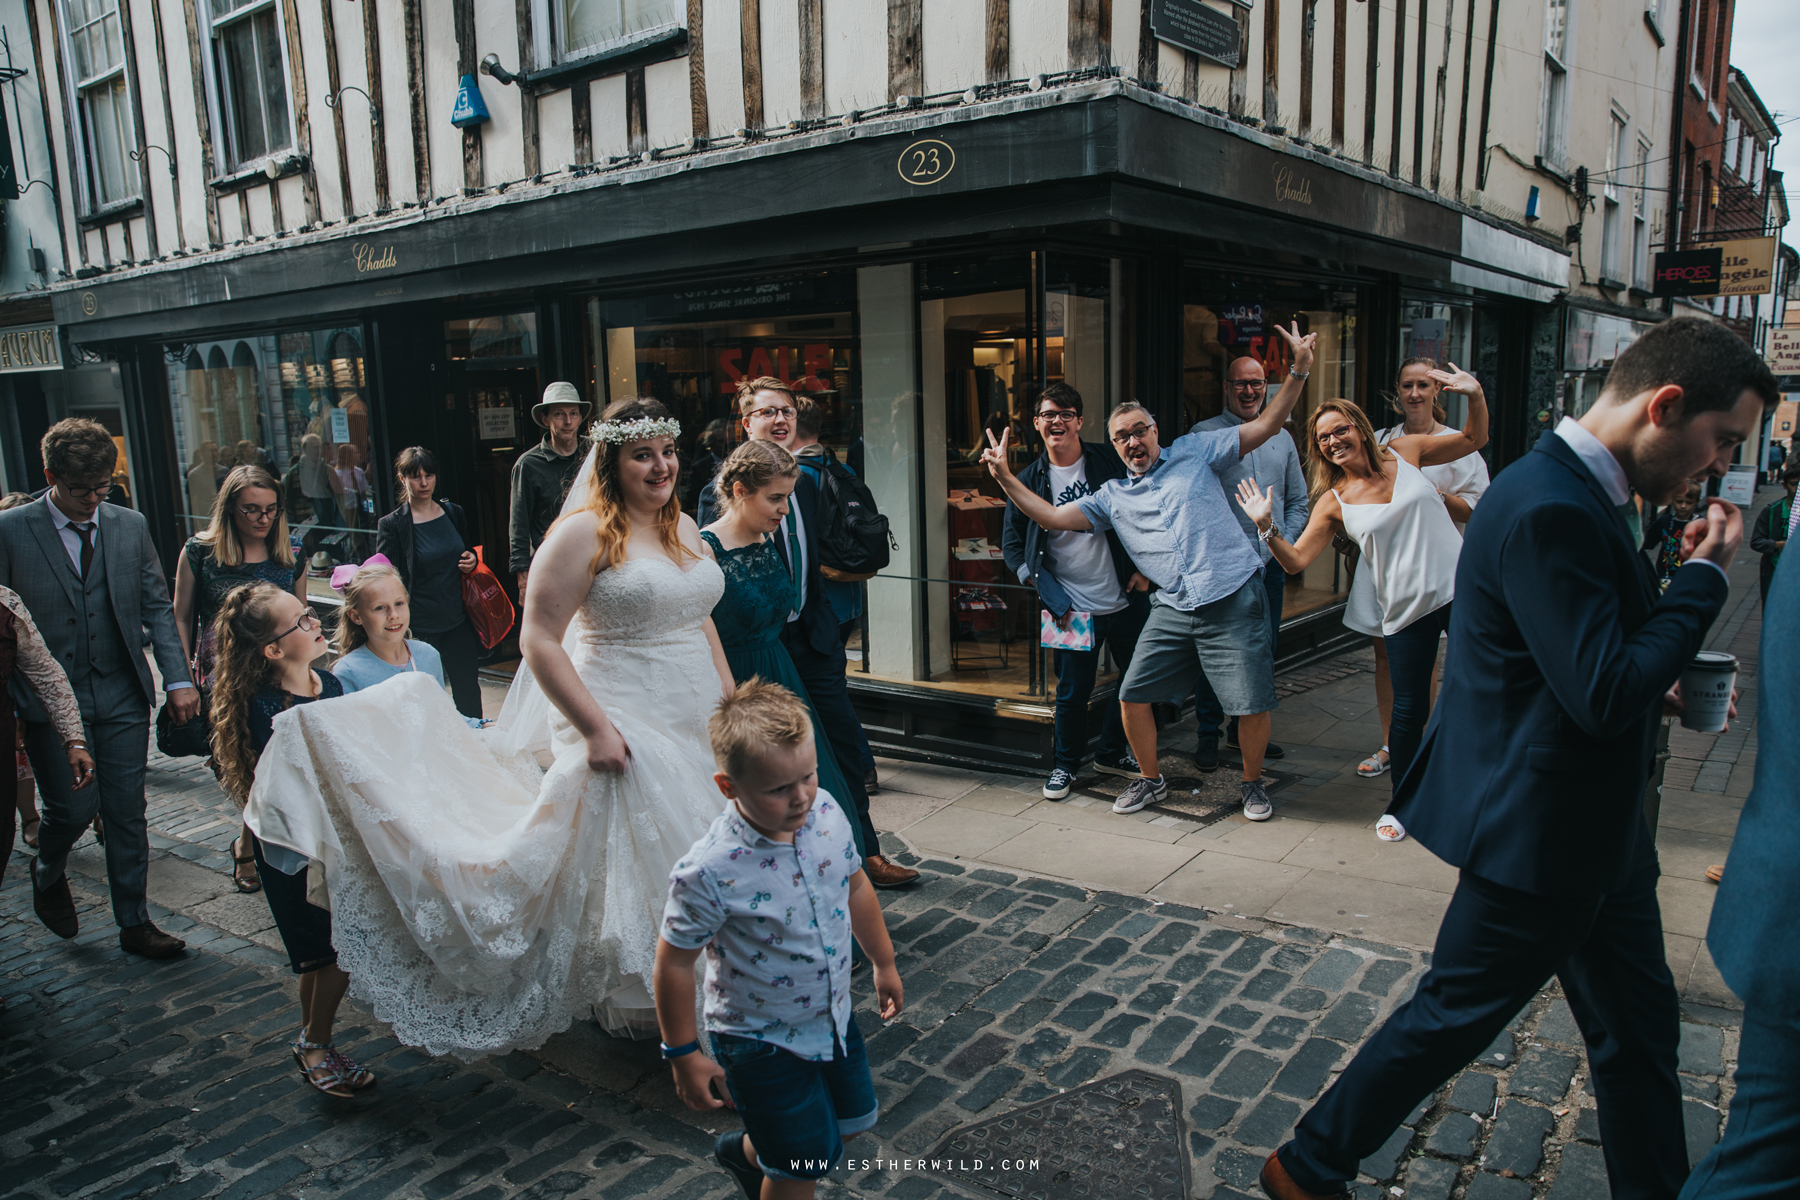 Norwich_Castle_Arcade_Grosvenor_Chip_Birdcage_Cathedral_Cloisters_Refectory_Wedding_Photography_Esther_Wild_Photographer_Norfolk_Kings_Lynn_3R8A1750.jpg